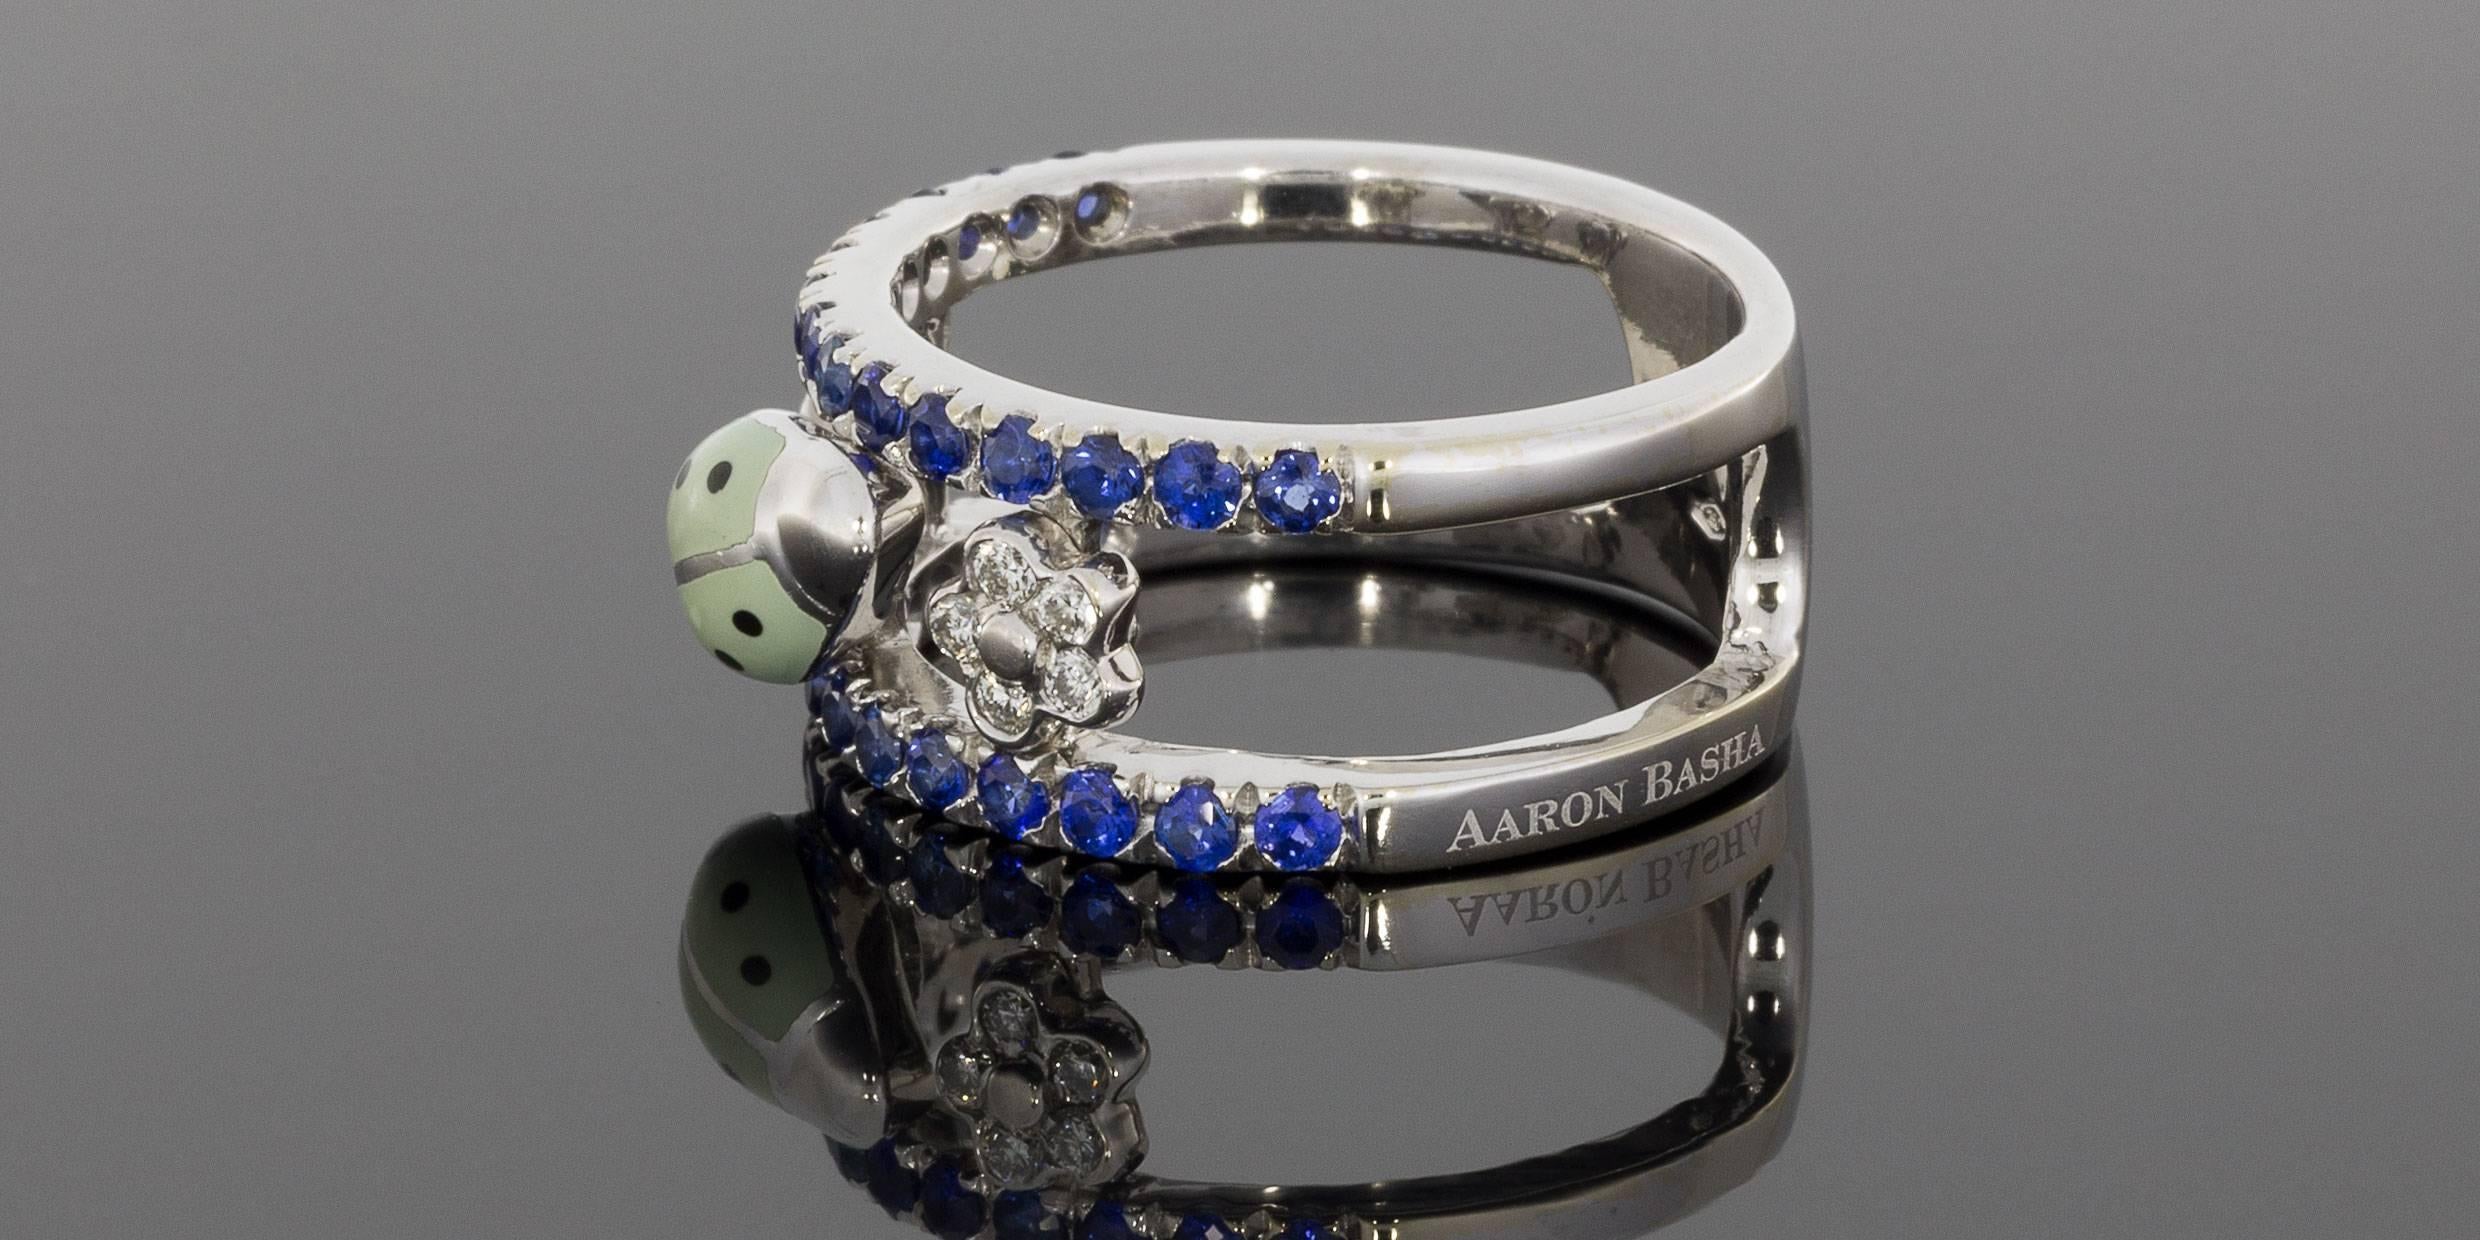 Often called the godfather of charms, Aaron Basha's exquisitely crafted jewelry has graced the pages of fashion magazines & been worn by generations of Hollywood celebrities & international royalty. His delightful jewelry is as sophisticated as it